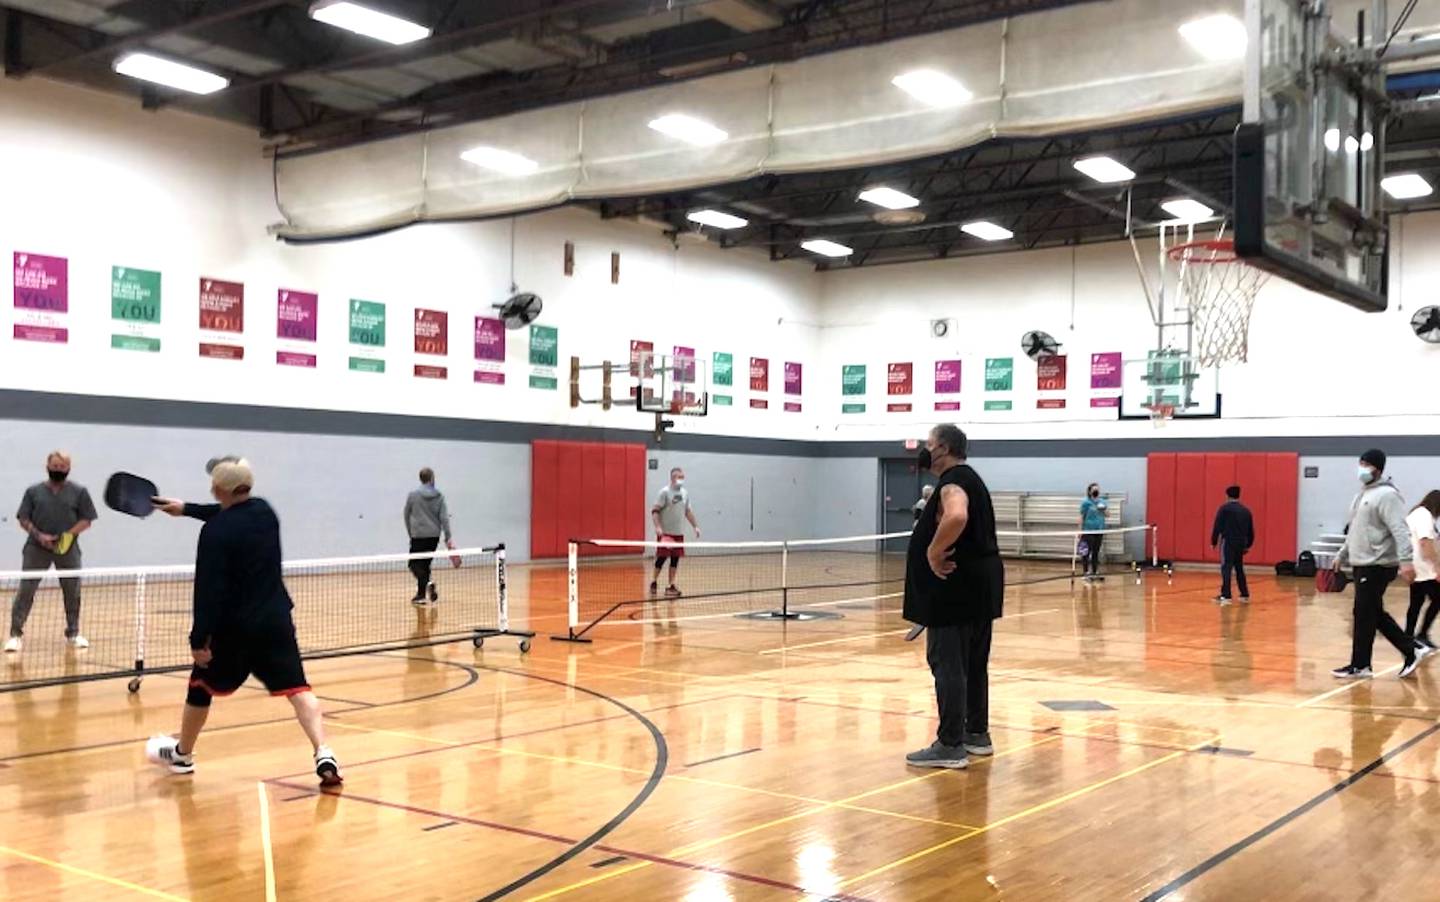 Three courts are filled with pickleball players at the Streator Family YMCA in this photo taken while masks were still required at the facility due to efforts to contain COVID-19. The organization plans to break ground on an outdoor pickleball facility later this month.